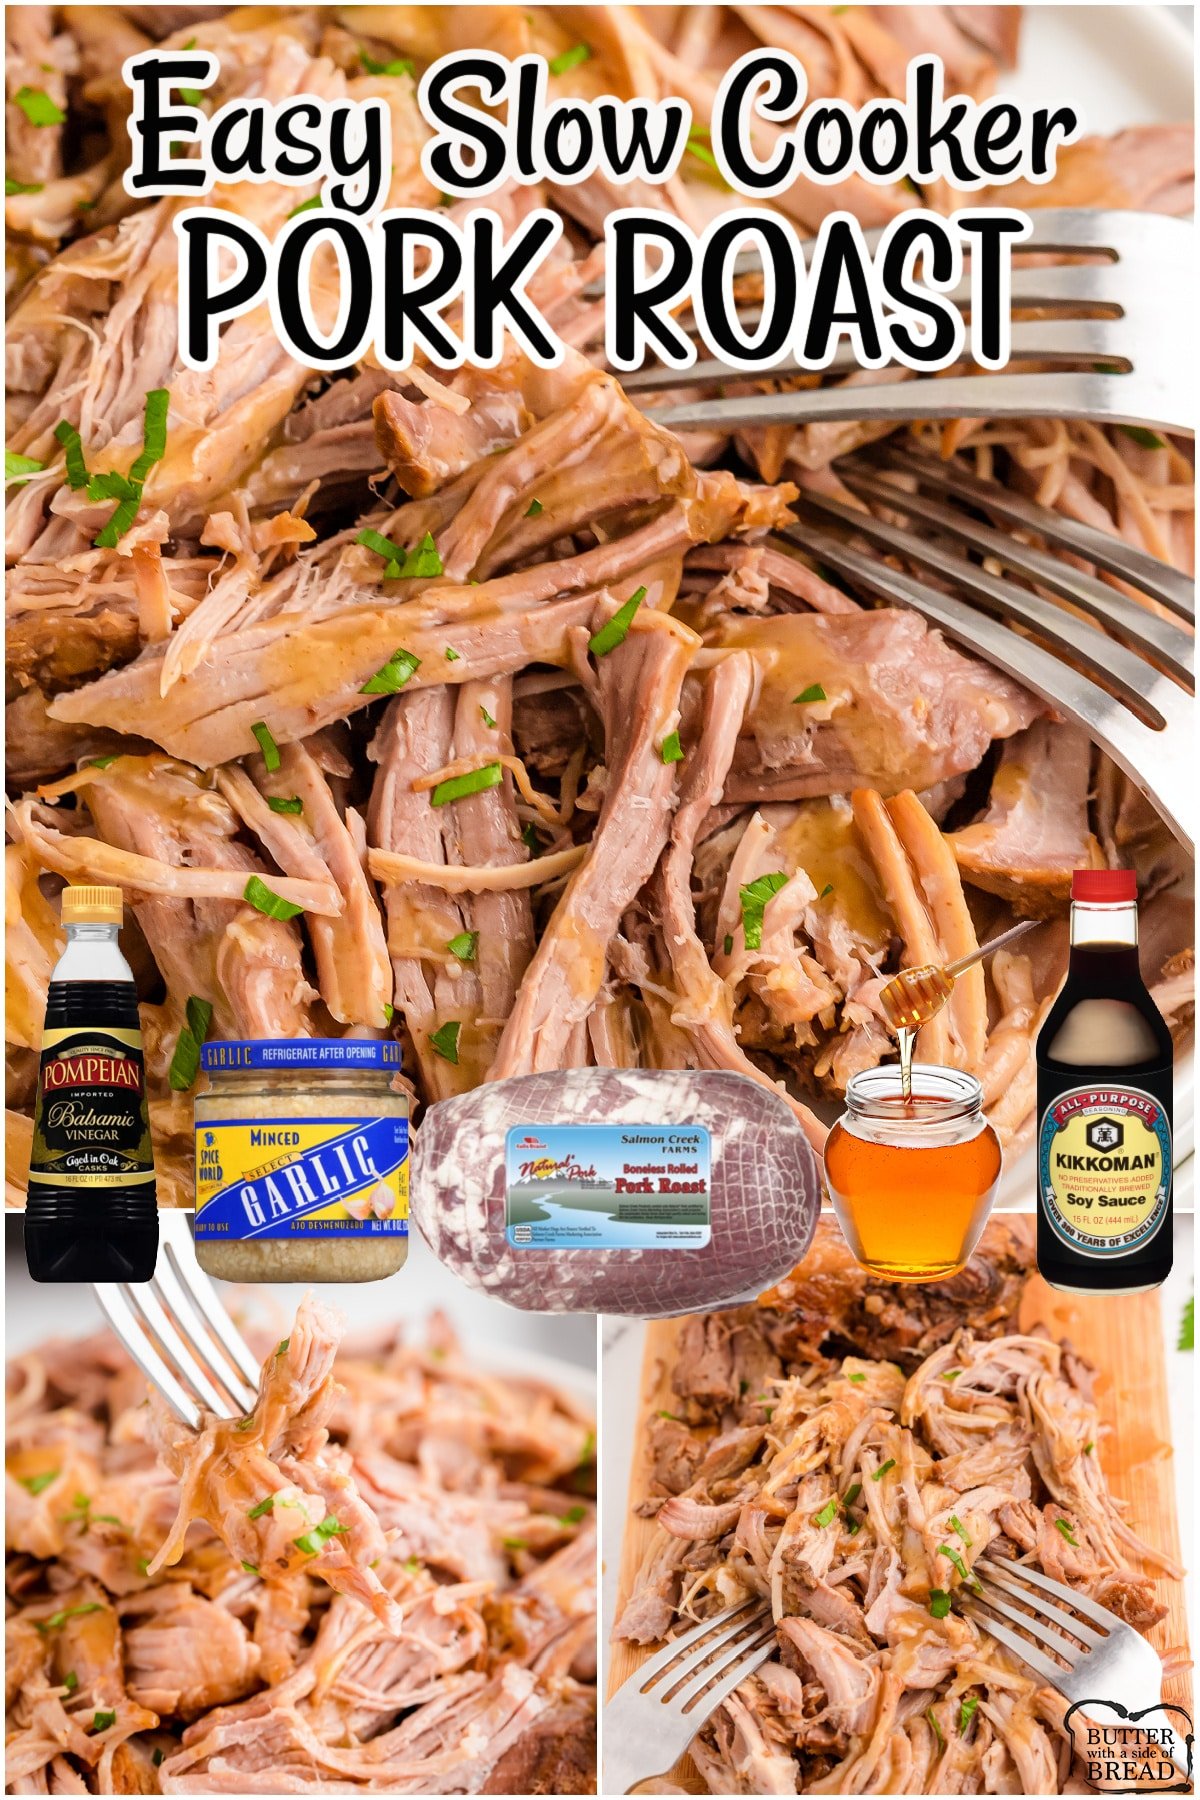 Slow Cooker Pork Roast made with simple ingredients, ready to cook in minutes! Fall-apart tender pork with a flavorful gravy on top make this crock pot pork recipe incredible.